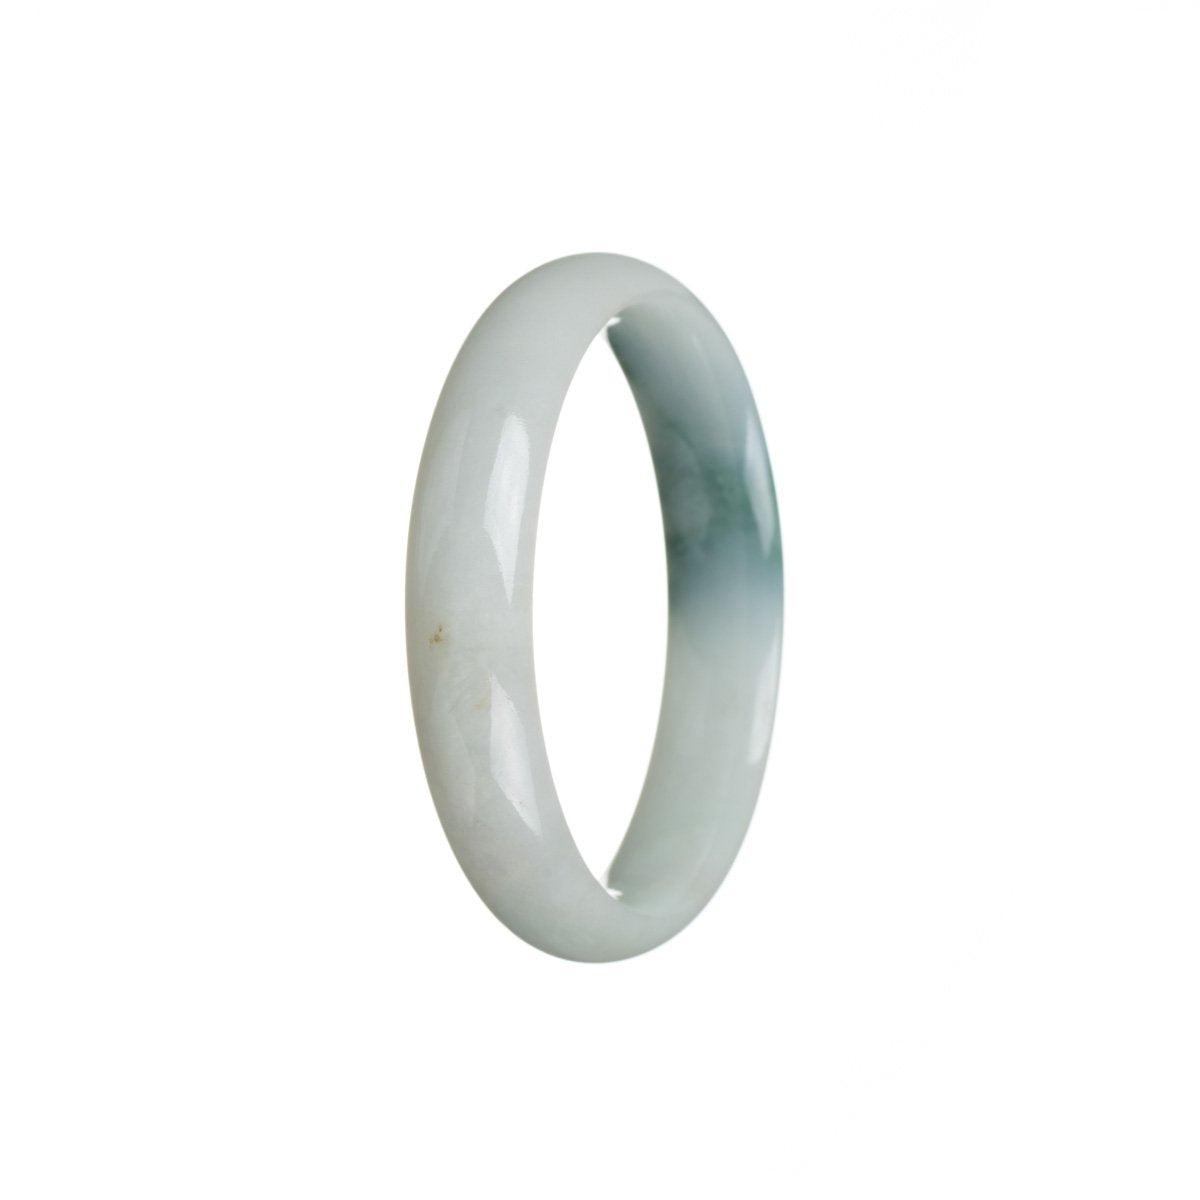 Image of a traditional jade bangle, 52mm in size, with a half moon shape. The bangle is made of untreated white jade, and it is certified for its authenticity.